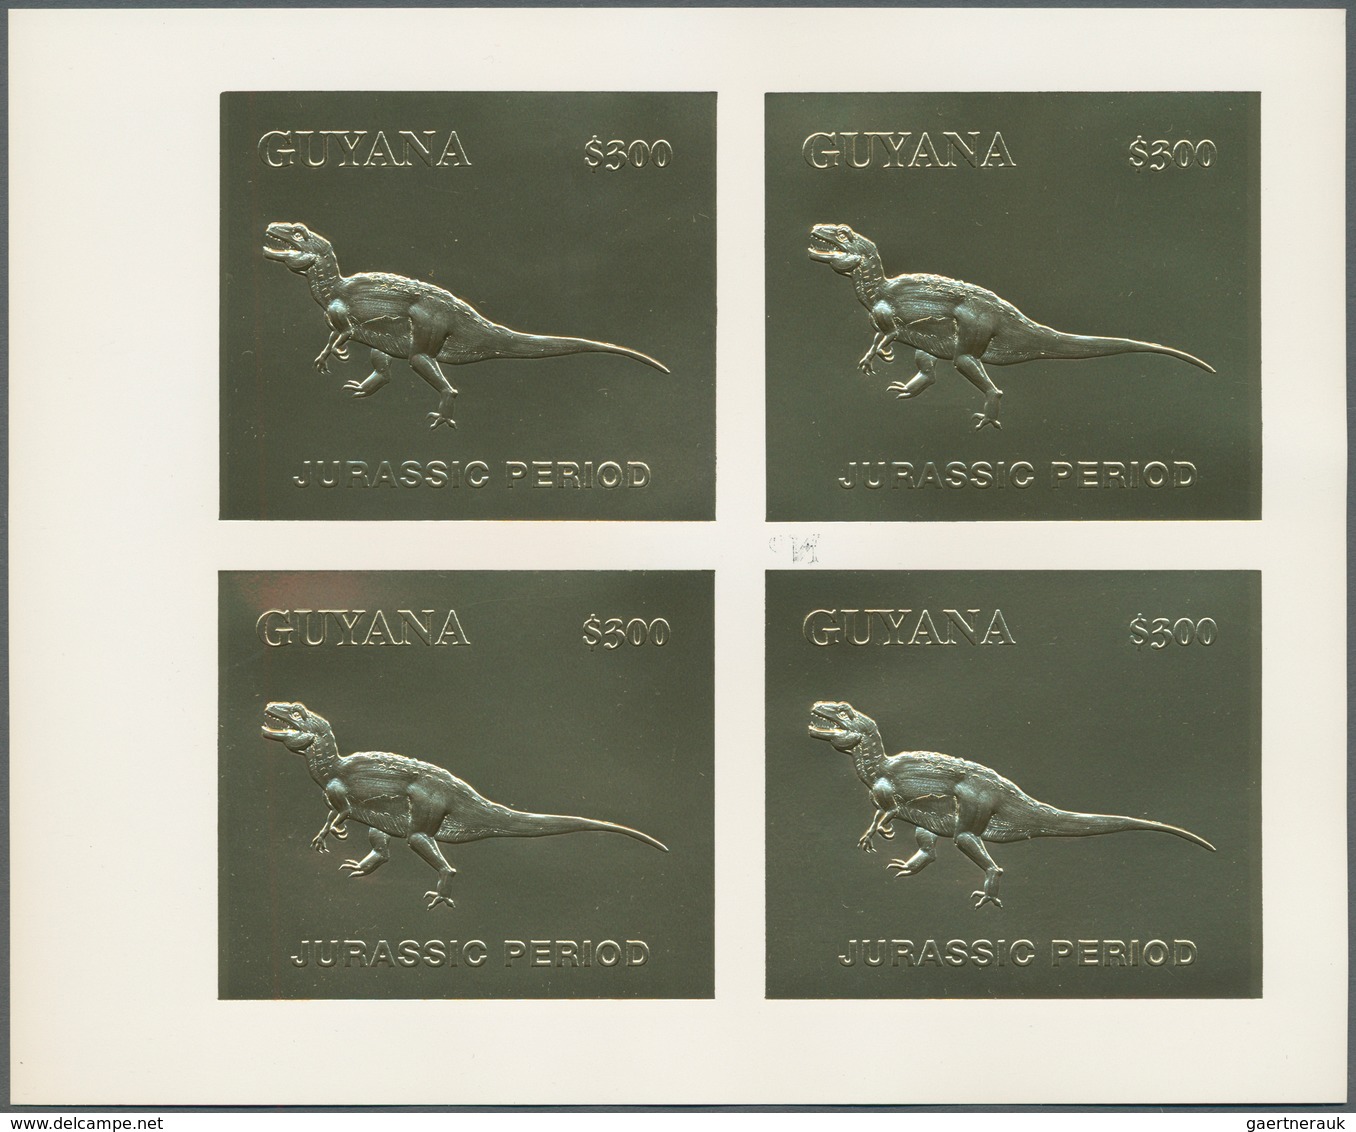 Guyana: 1992/1994, accumulation with GOLD and SILVER stamps, sheetlets of four and miniature sheets